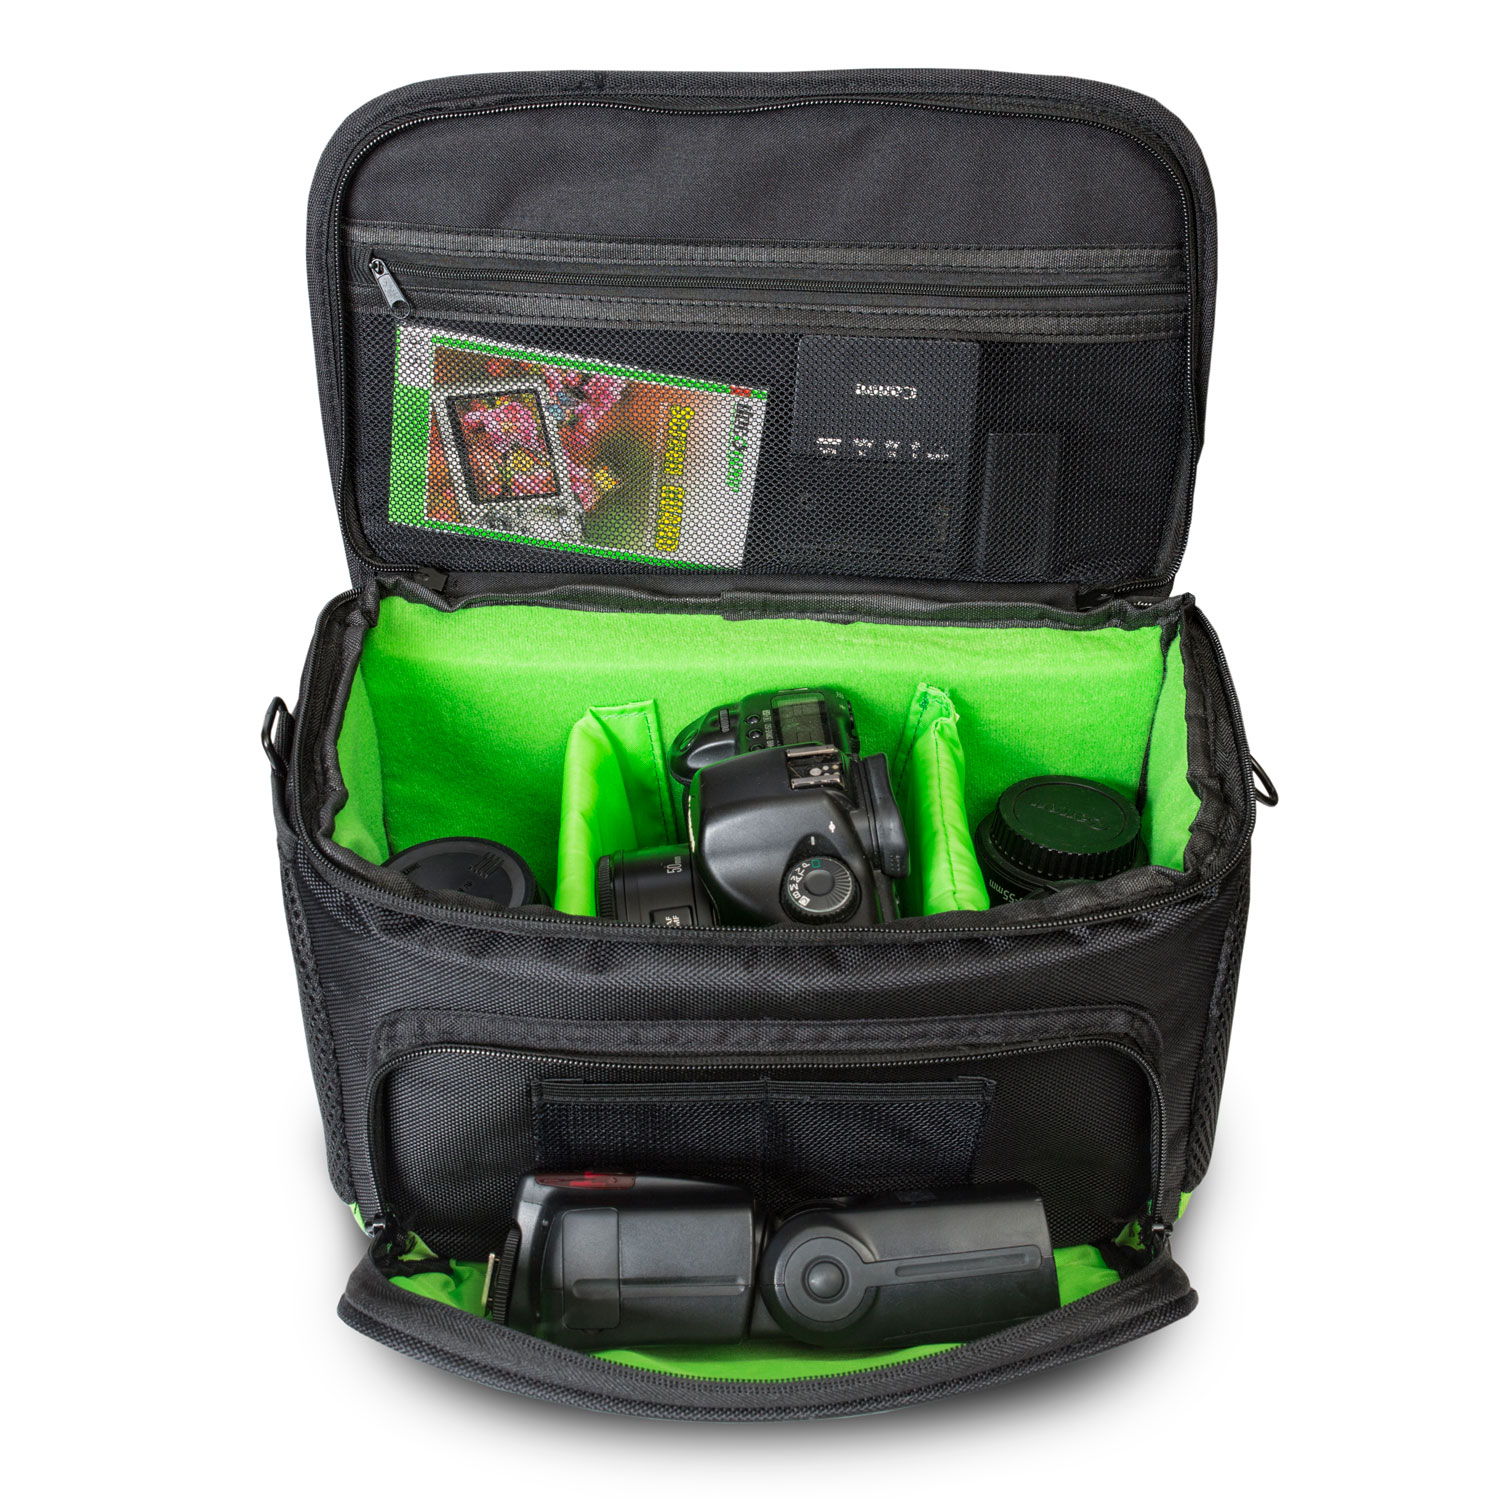 DSLR Camera Bag and Mirrorless cameras - Large with accessories (Deco Gear) 843342117360 | eBay